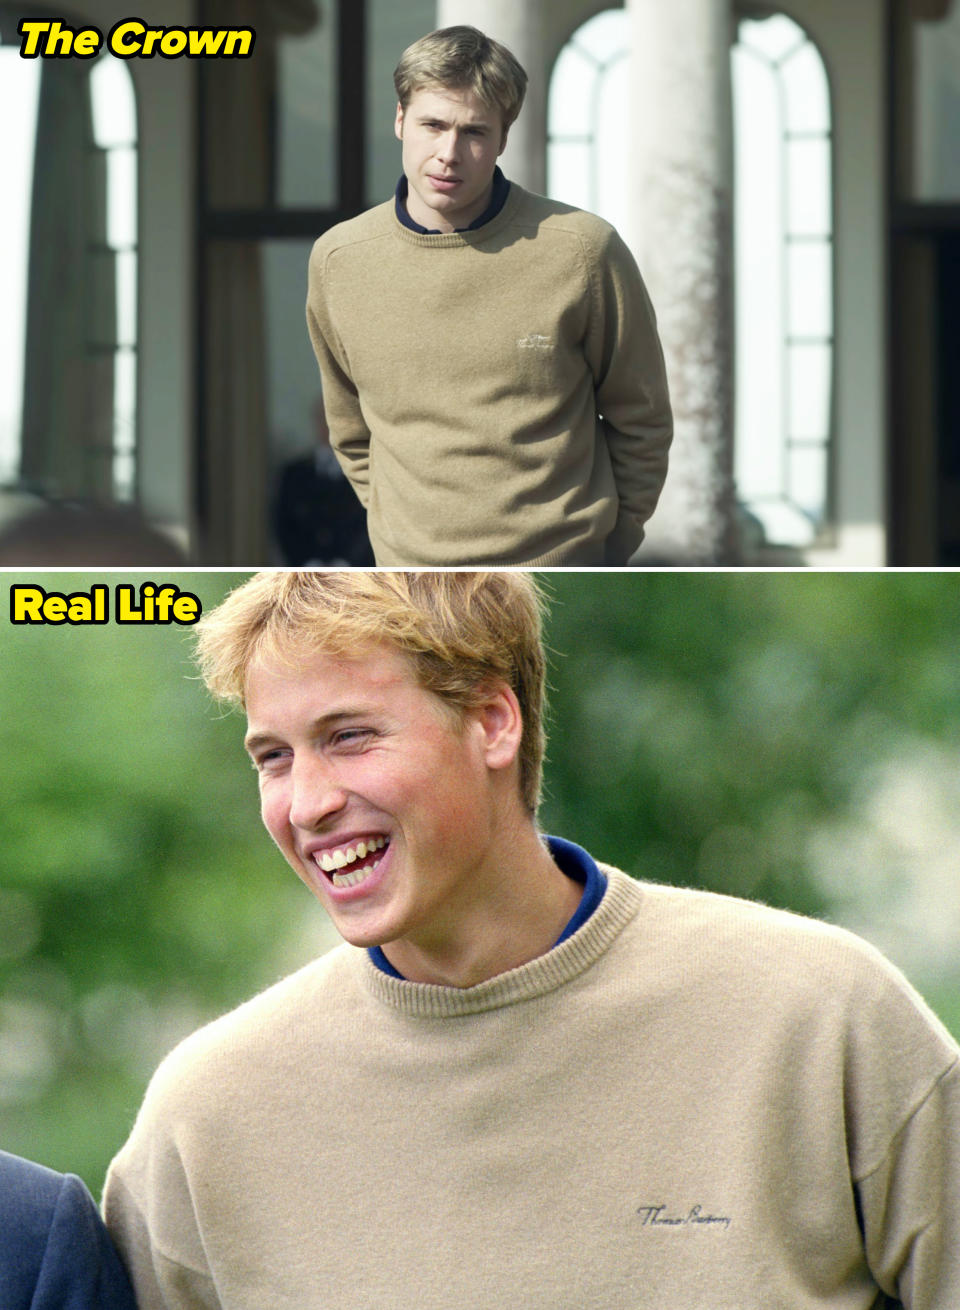 Side-by-side images of real life vs. "The Crown" of Prince William